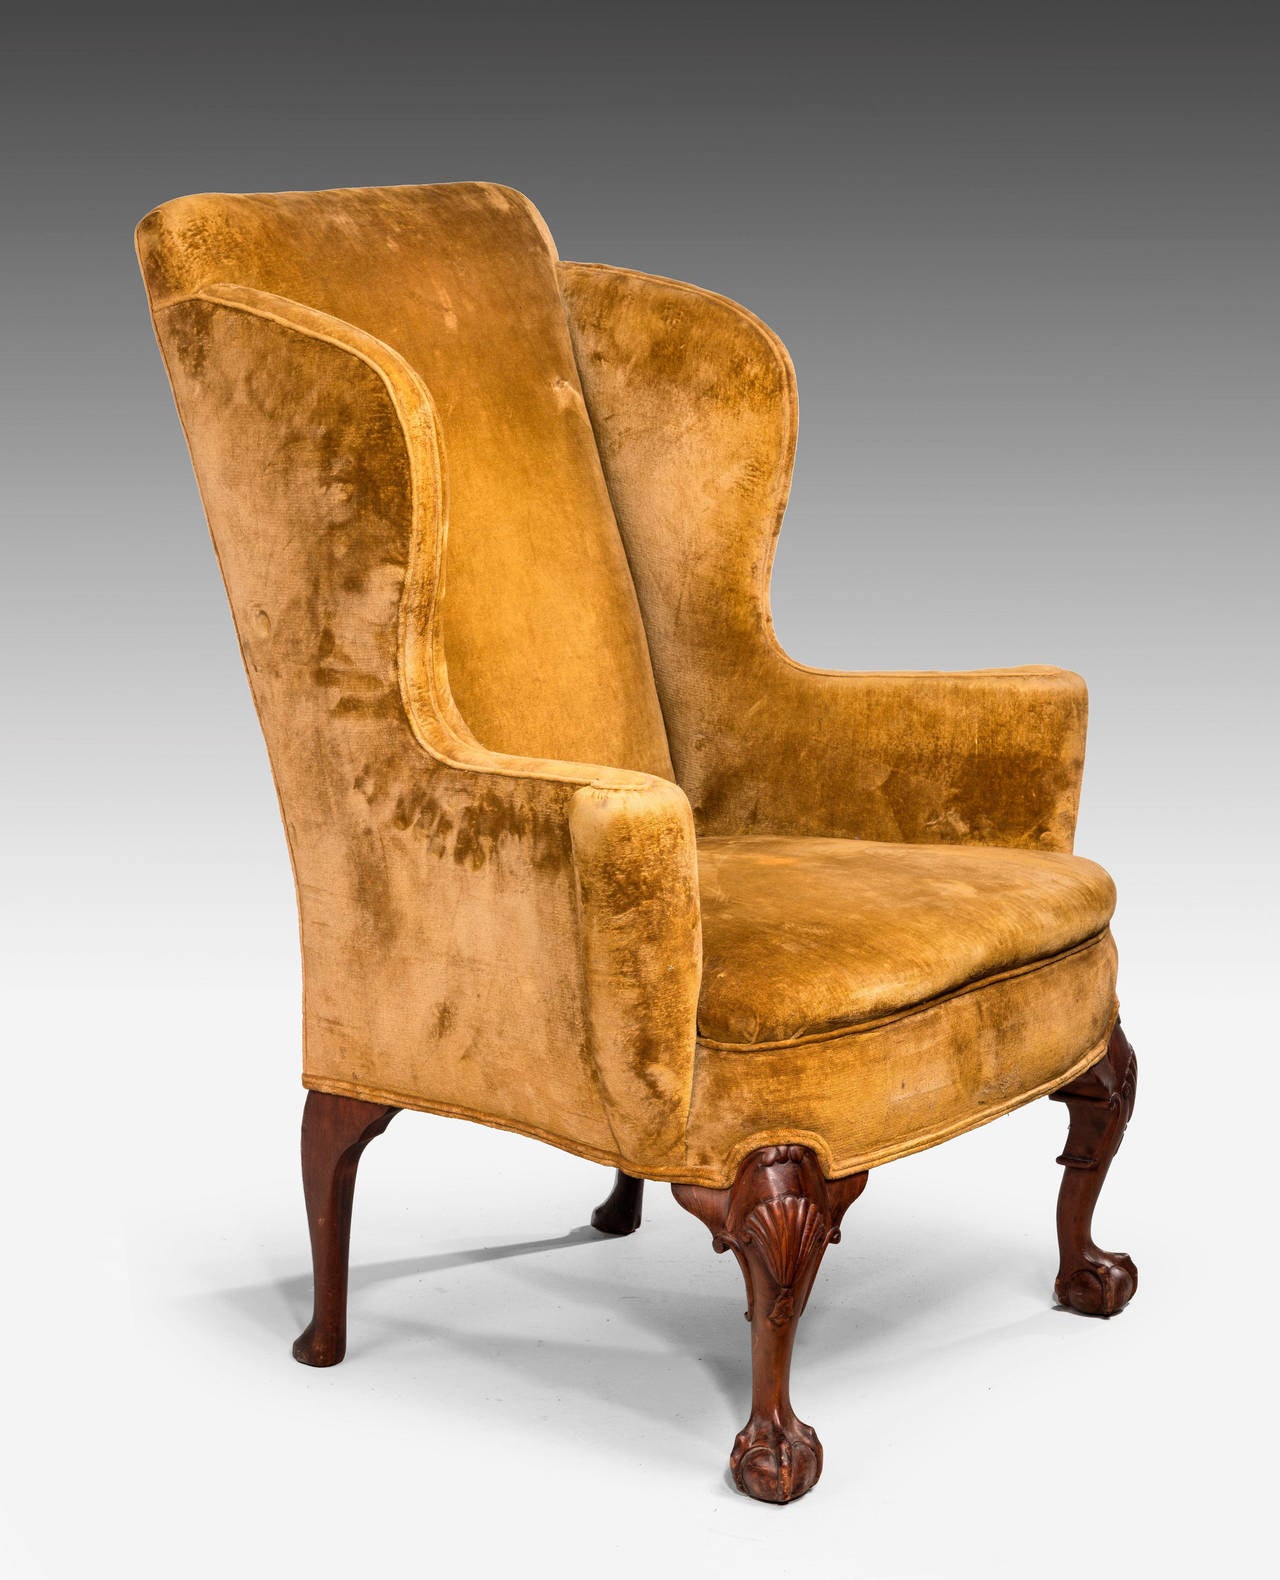 An elegant and well-shaped late 19th century walnut framed wing chair. With flared arms on shaped supports, terminating in claw and ball feet. Very good overall design.

An 18th or 19th century wing chair is an easy chair or club chair with